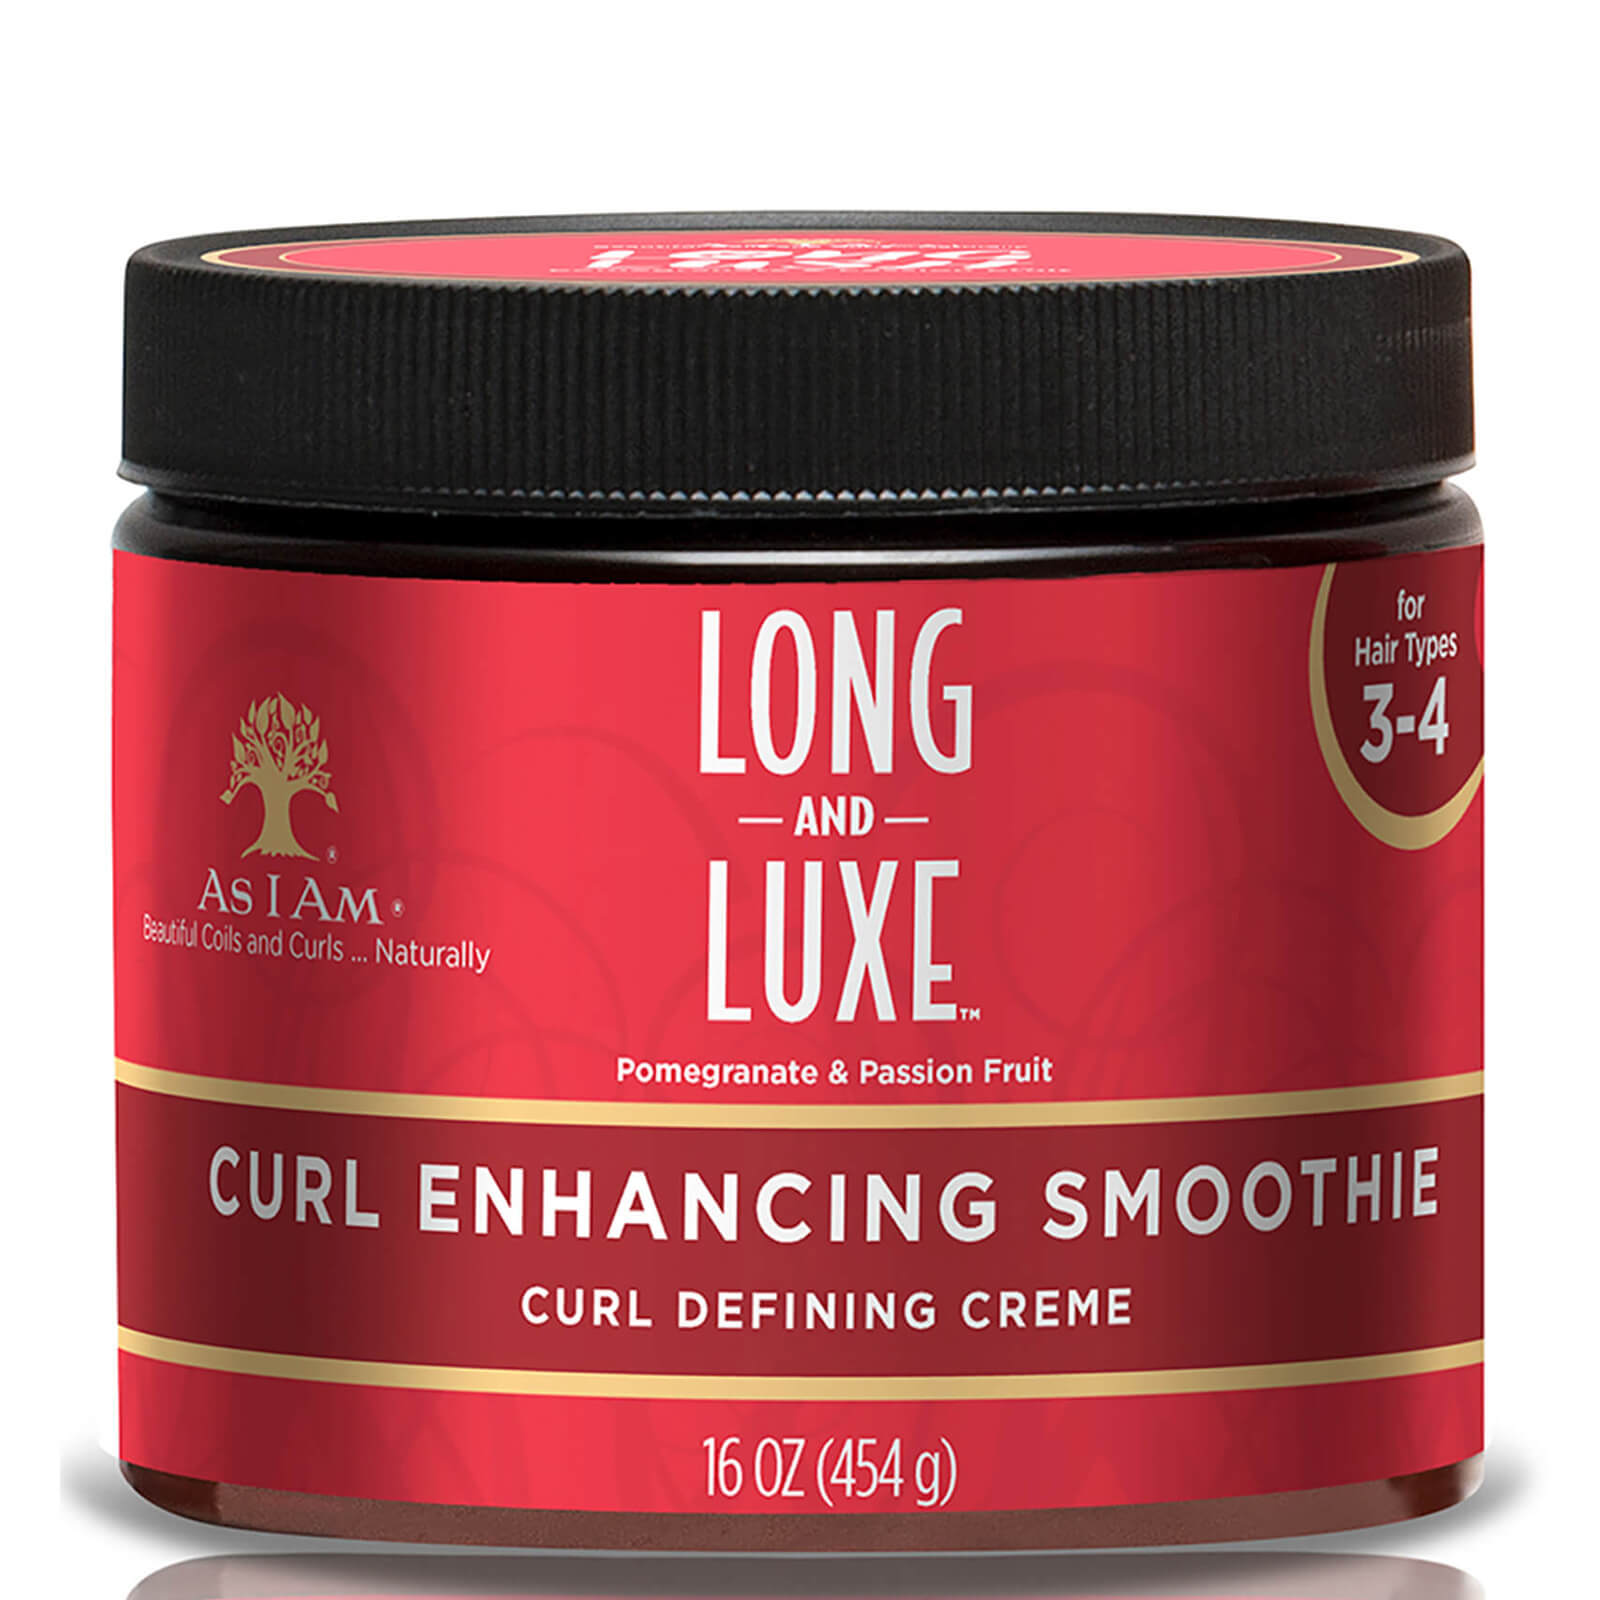 Photos - Hair Product As I Am Long and Luxe Curl Enhancing Smoothie 454g 120664